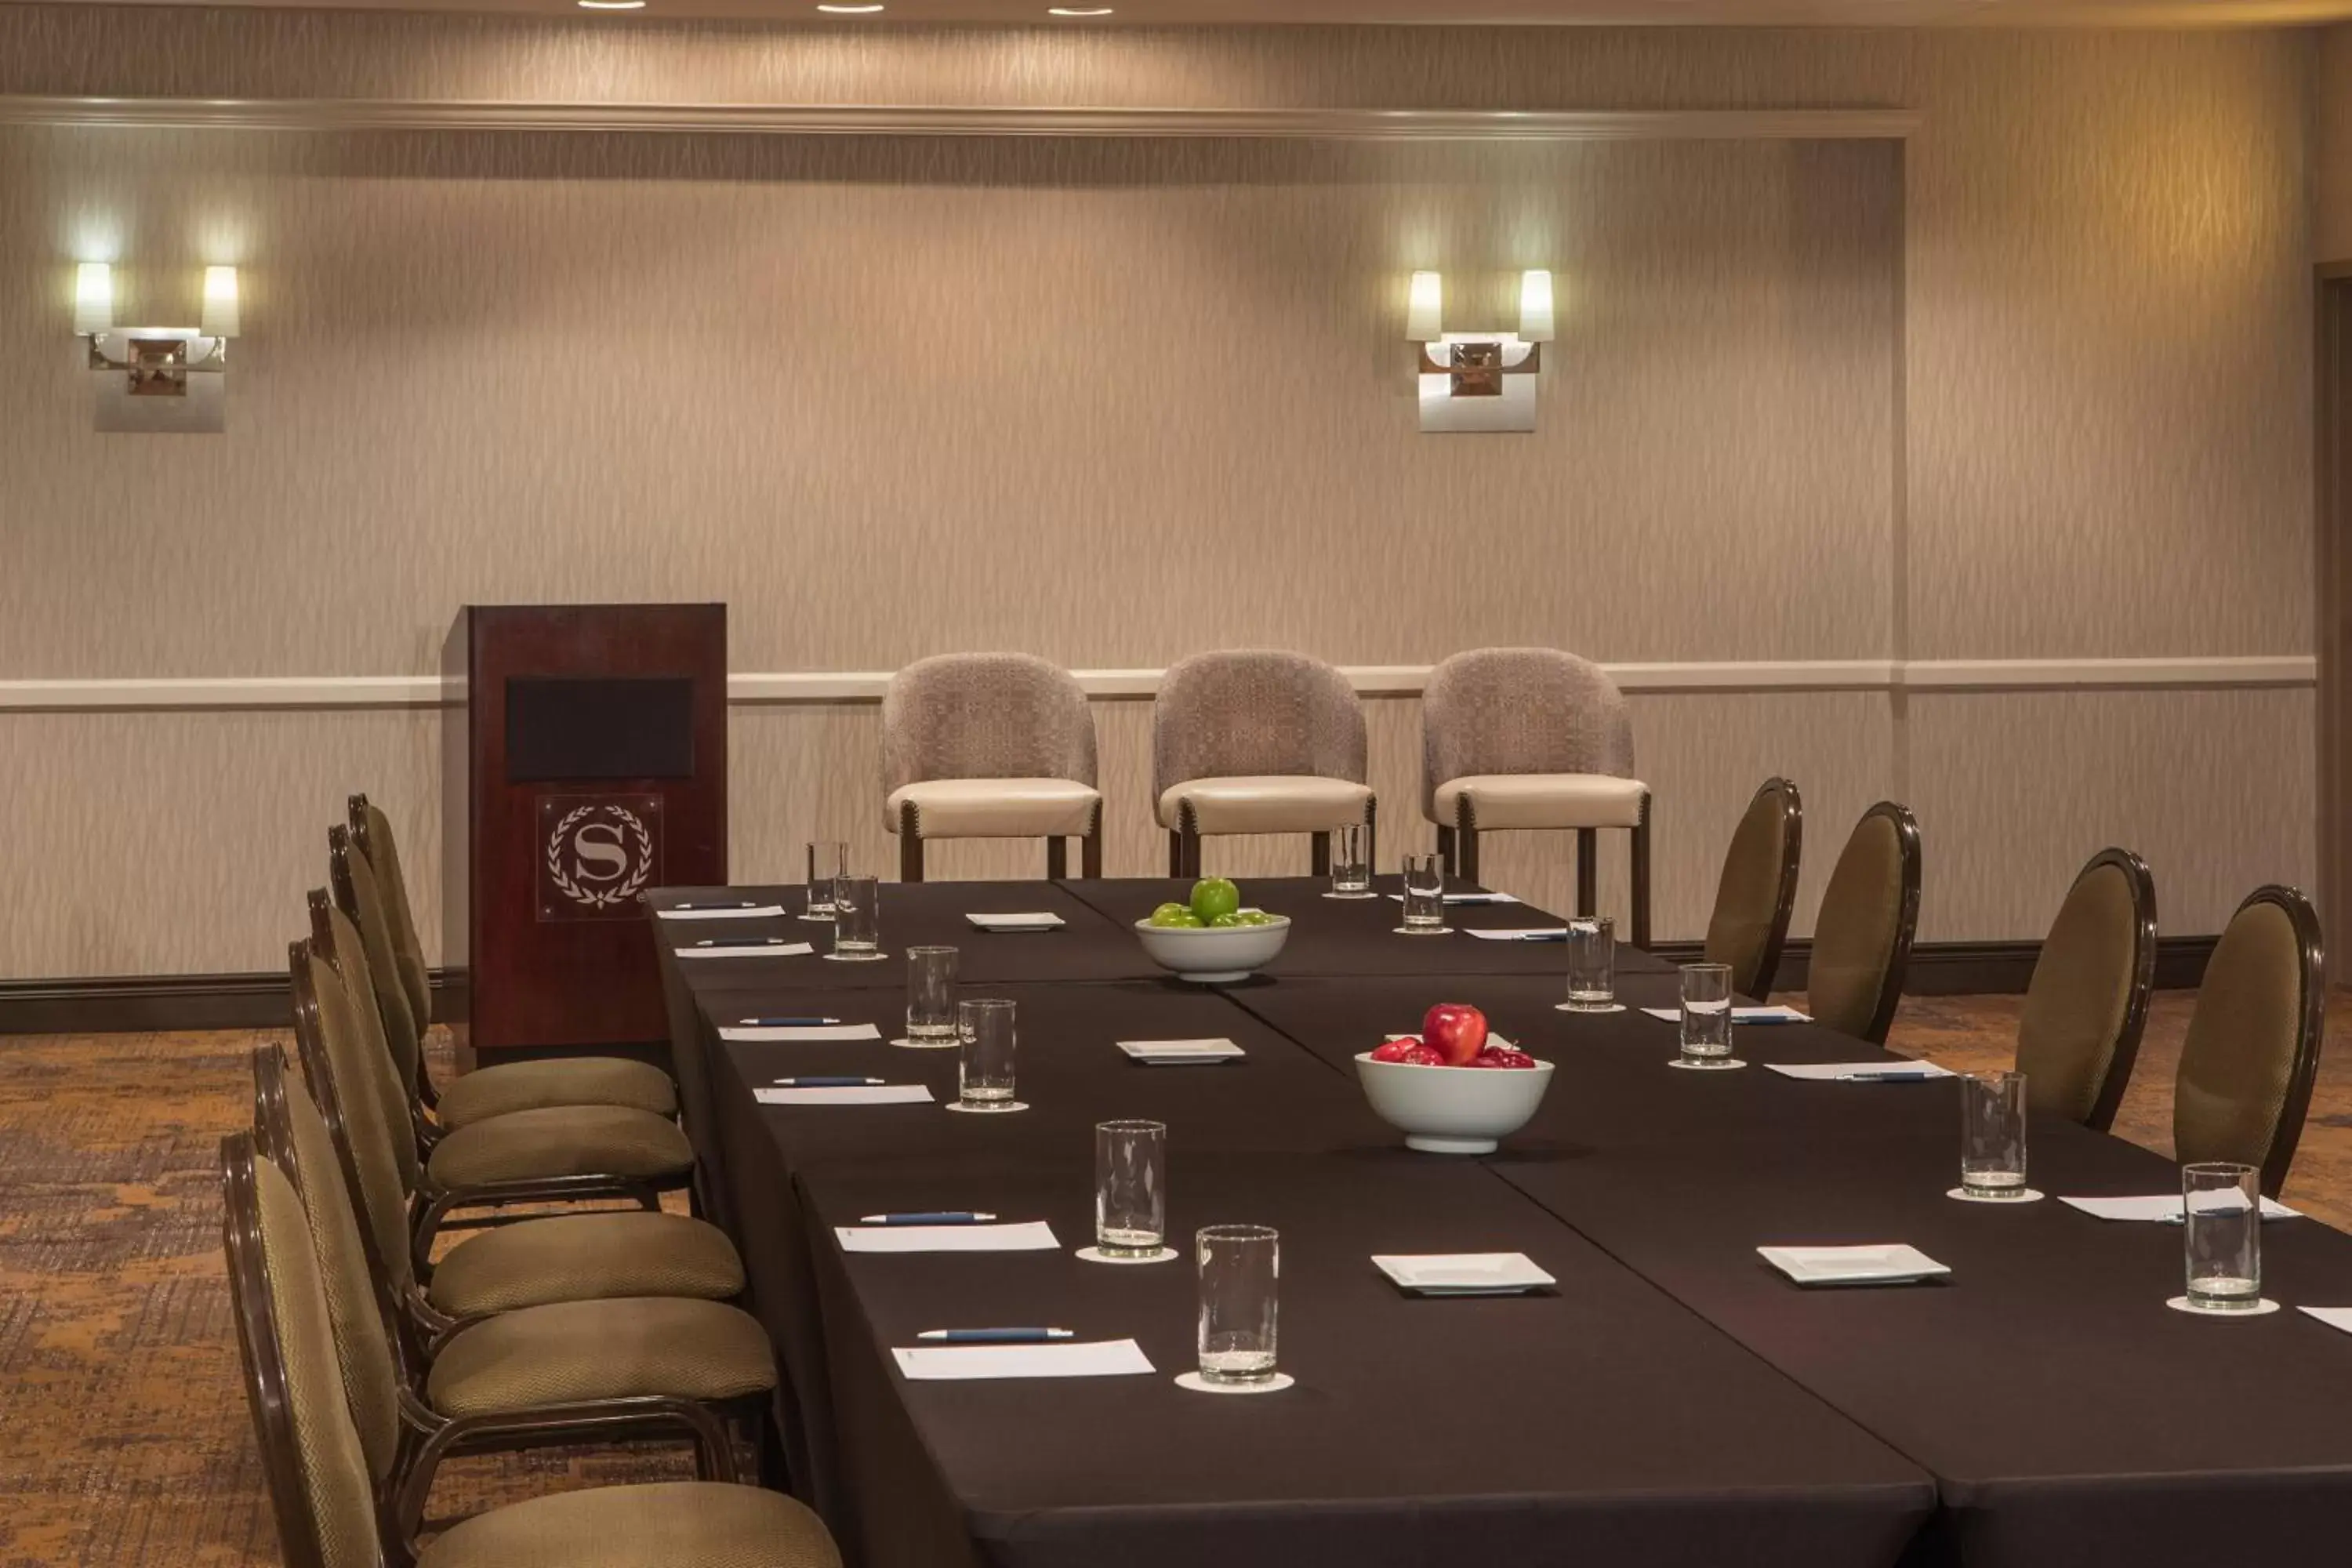 Meeting/conference room in Sheraton Suites Chicago Elk Grove